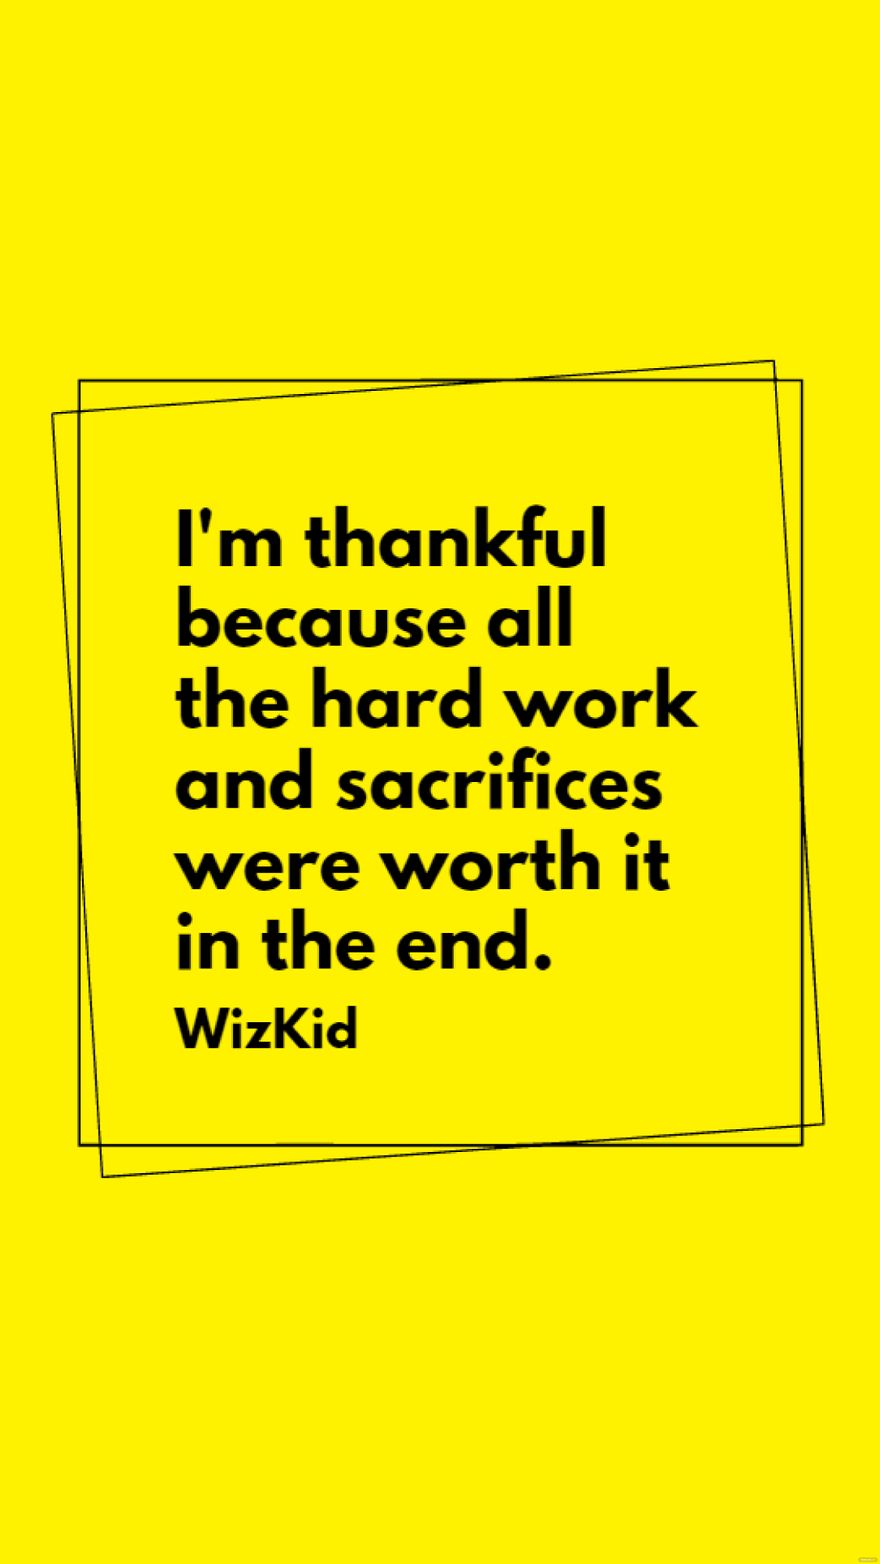 WizKid - I'm thankful because all the hard work and sacrifices were worth it in the end.